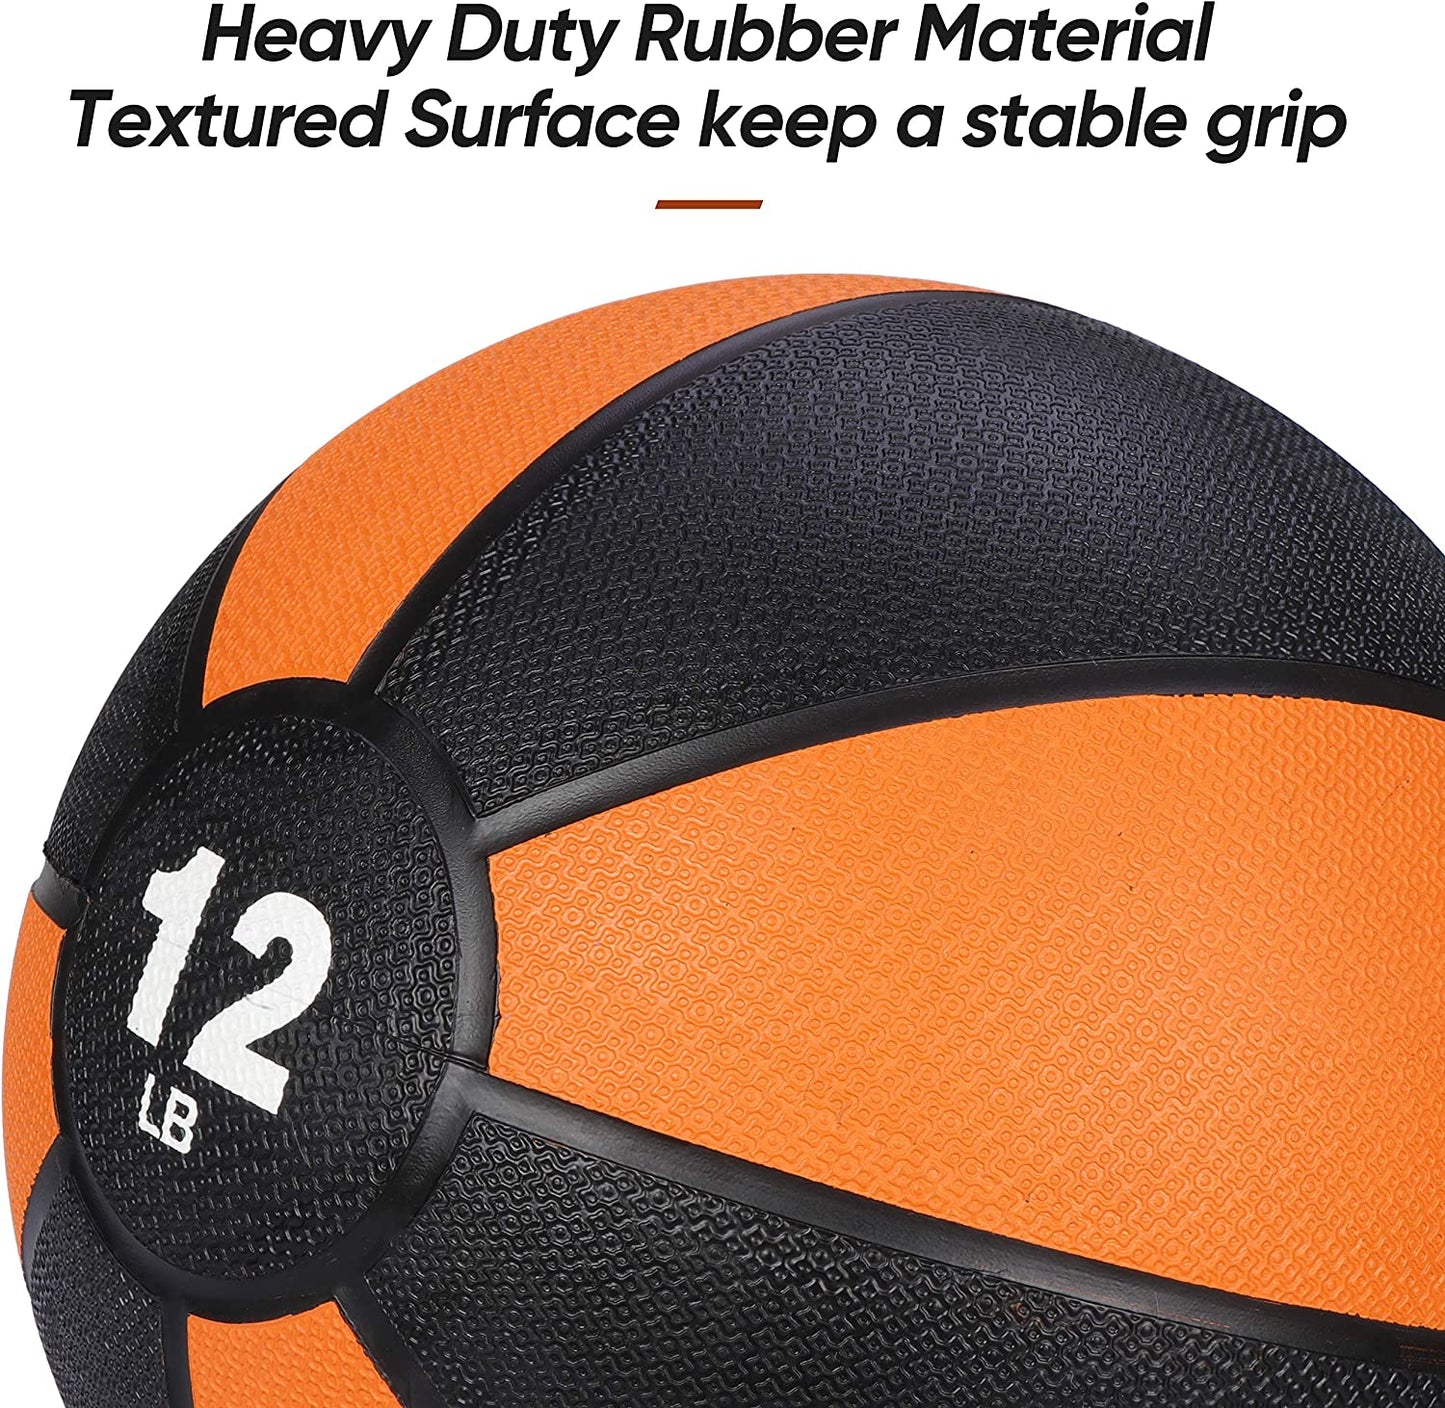 Fitness Medicine Ball 12lb Weighted Exercise Ball with Textured Grip Fitness Core Strength Training Rubber Ball Home Gym Workout Equipment